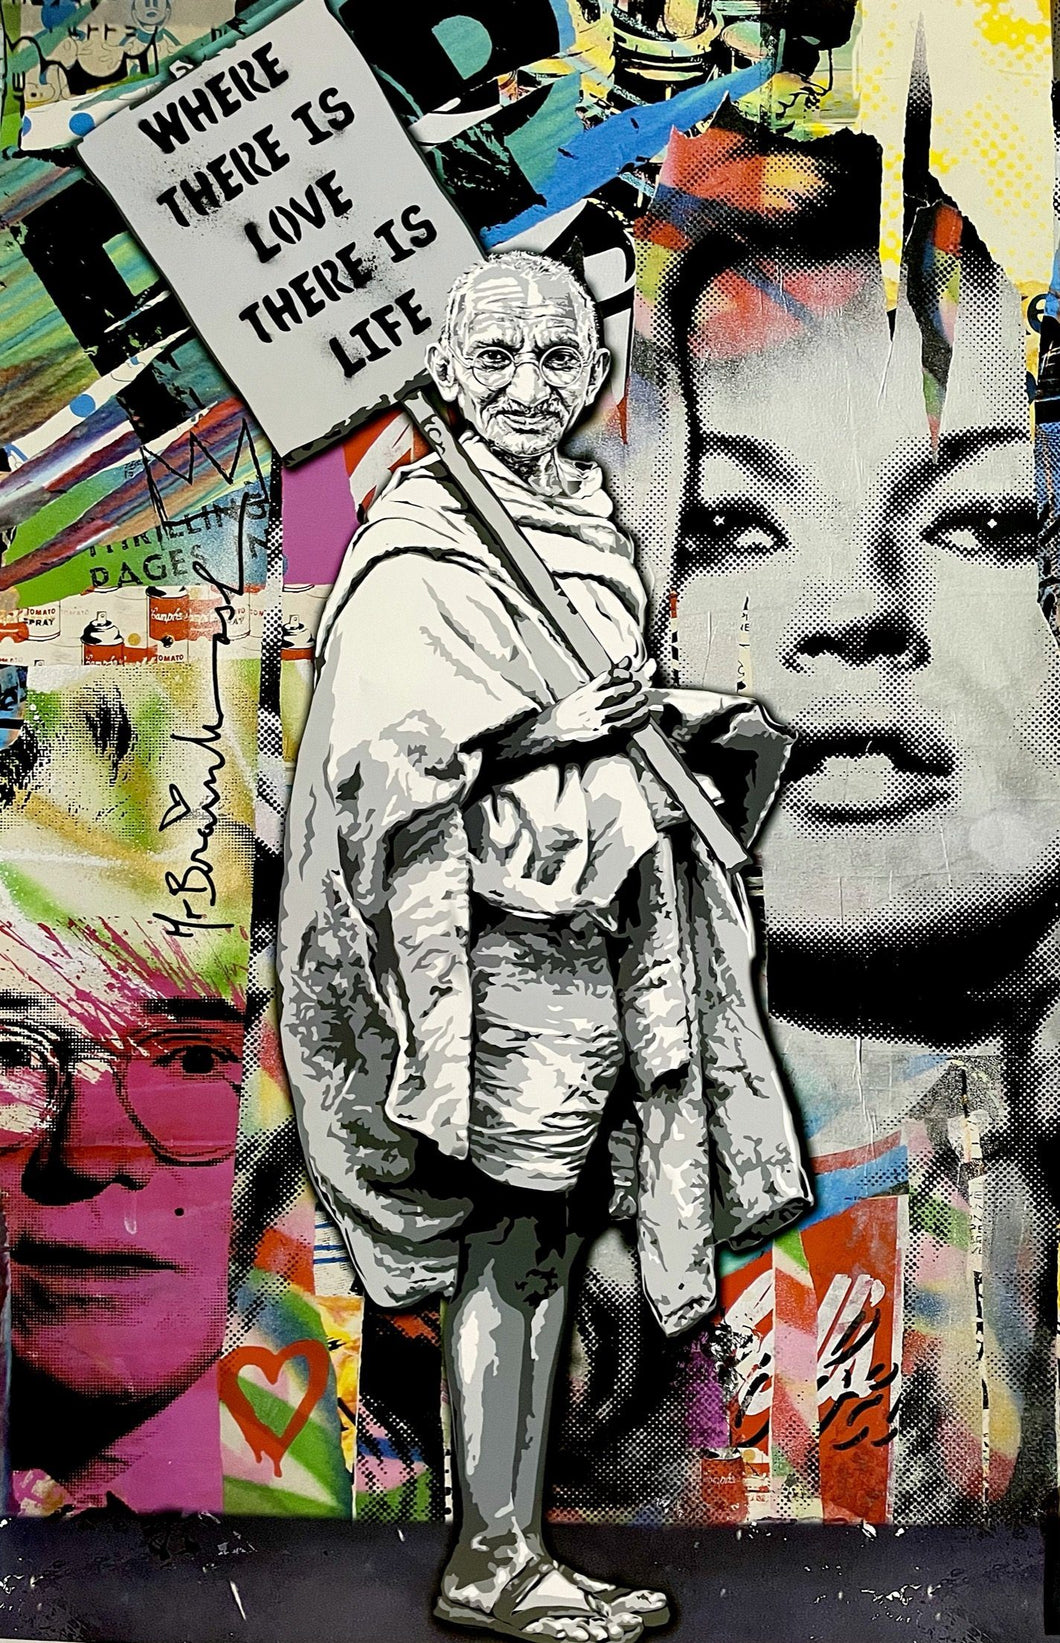 Where There is Love There is Life (Ghandi) Print Mr. Brainwash